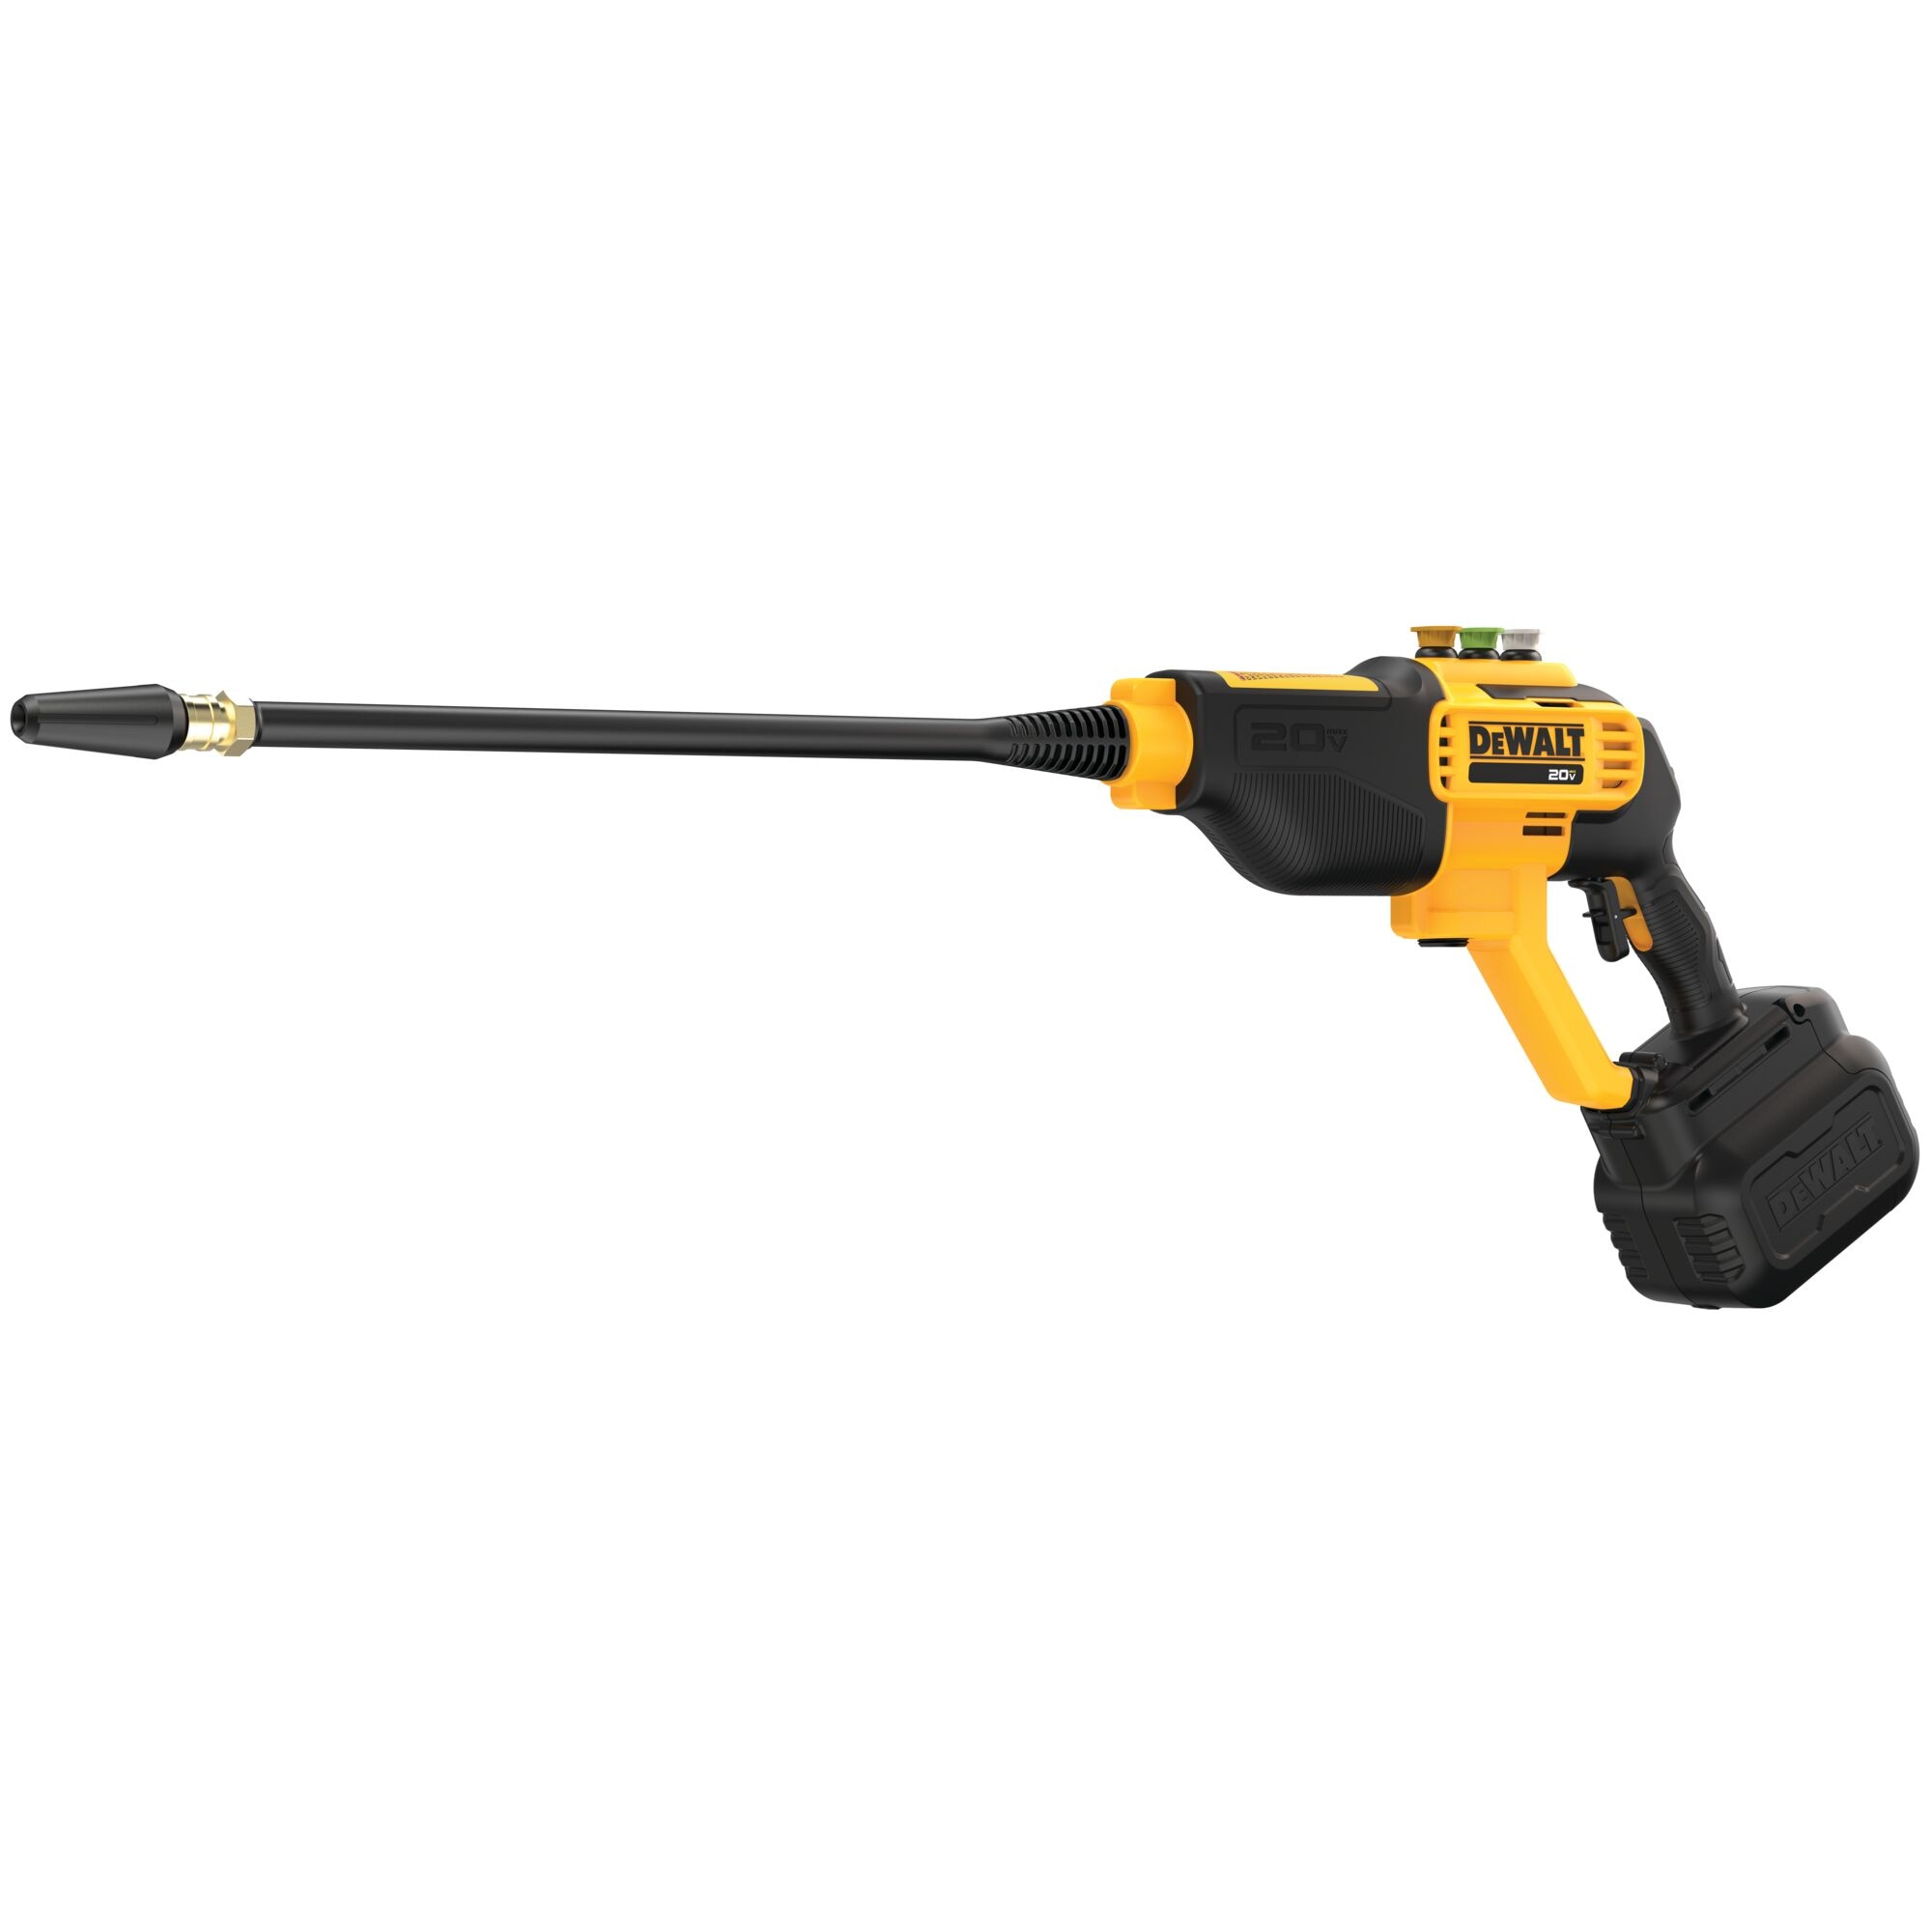 Alloyman  Power Tools for Home and Professional Use